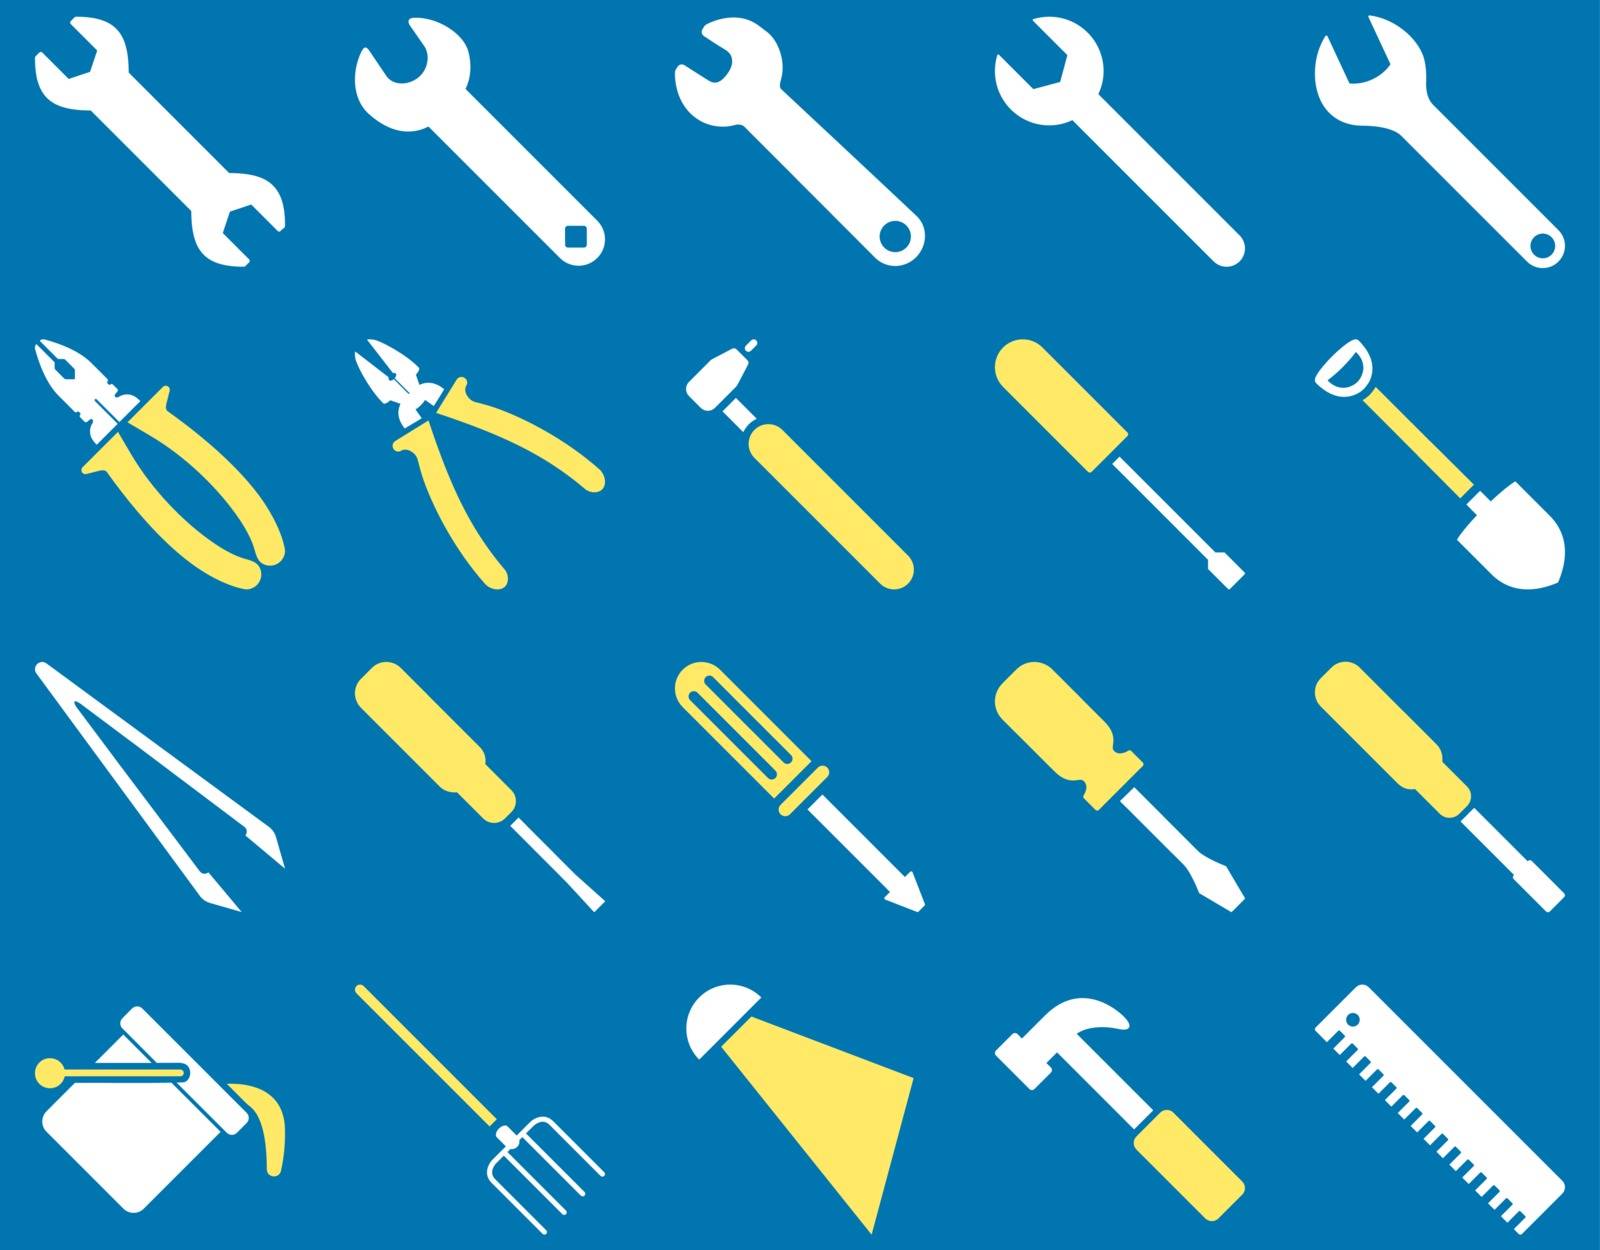 Equipment and Tools Icons. Vector set style is bicolor flat images, yellow and white colors, isolated on a blue background.